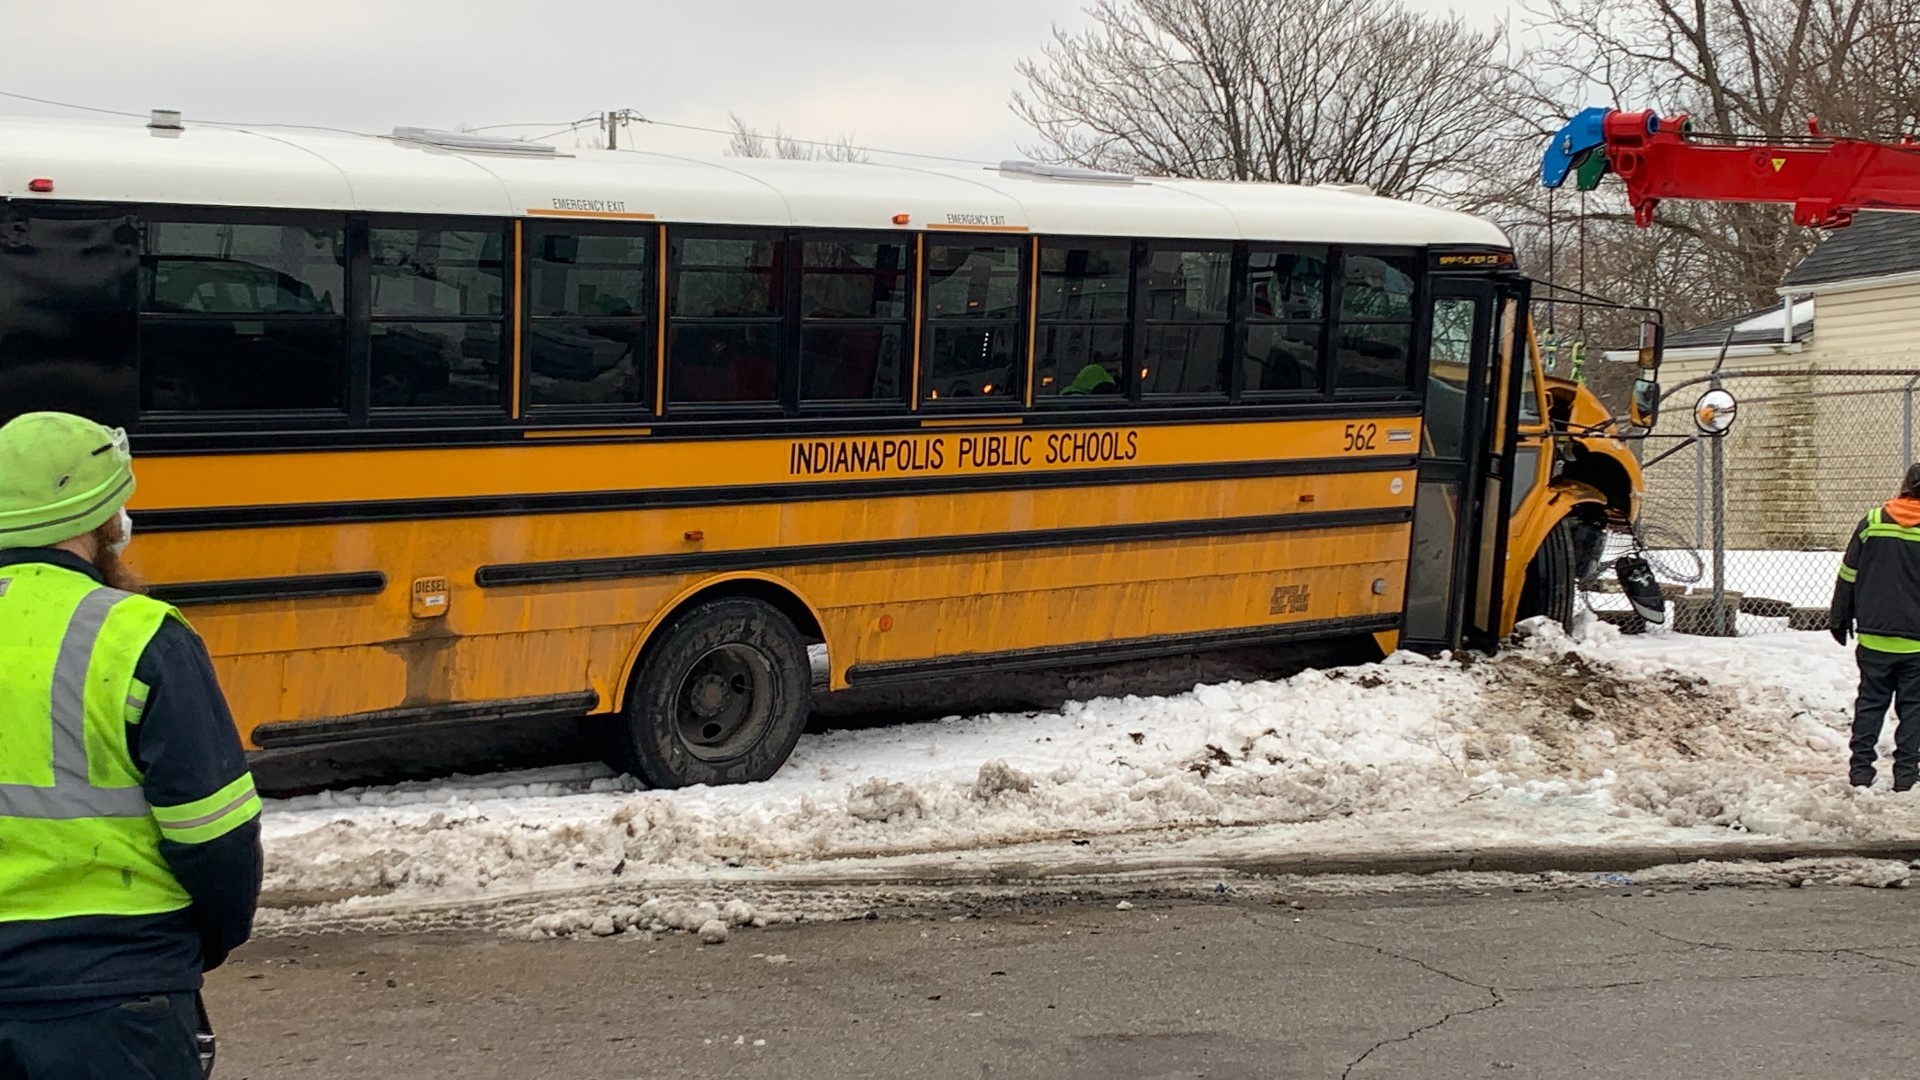 Five children and two adults were on a school bus when it crashed. There were no serious injuries.